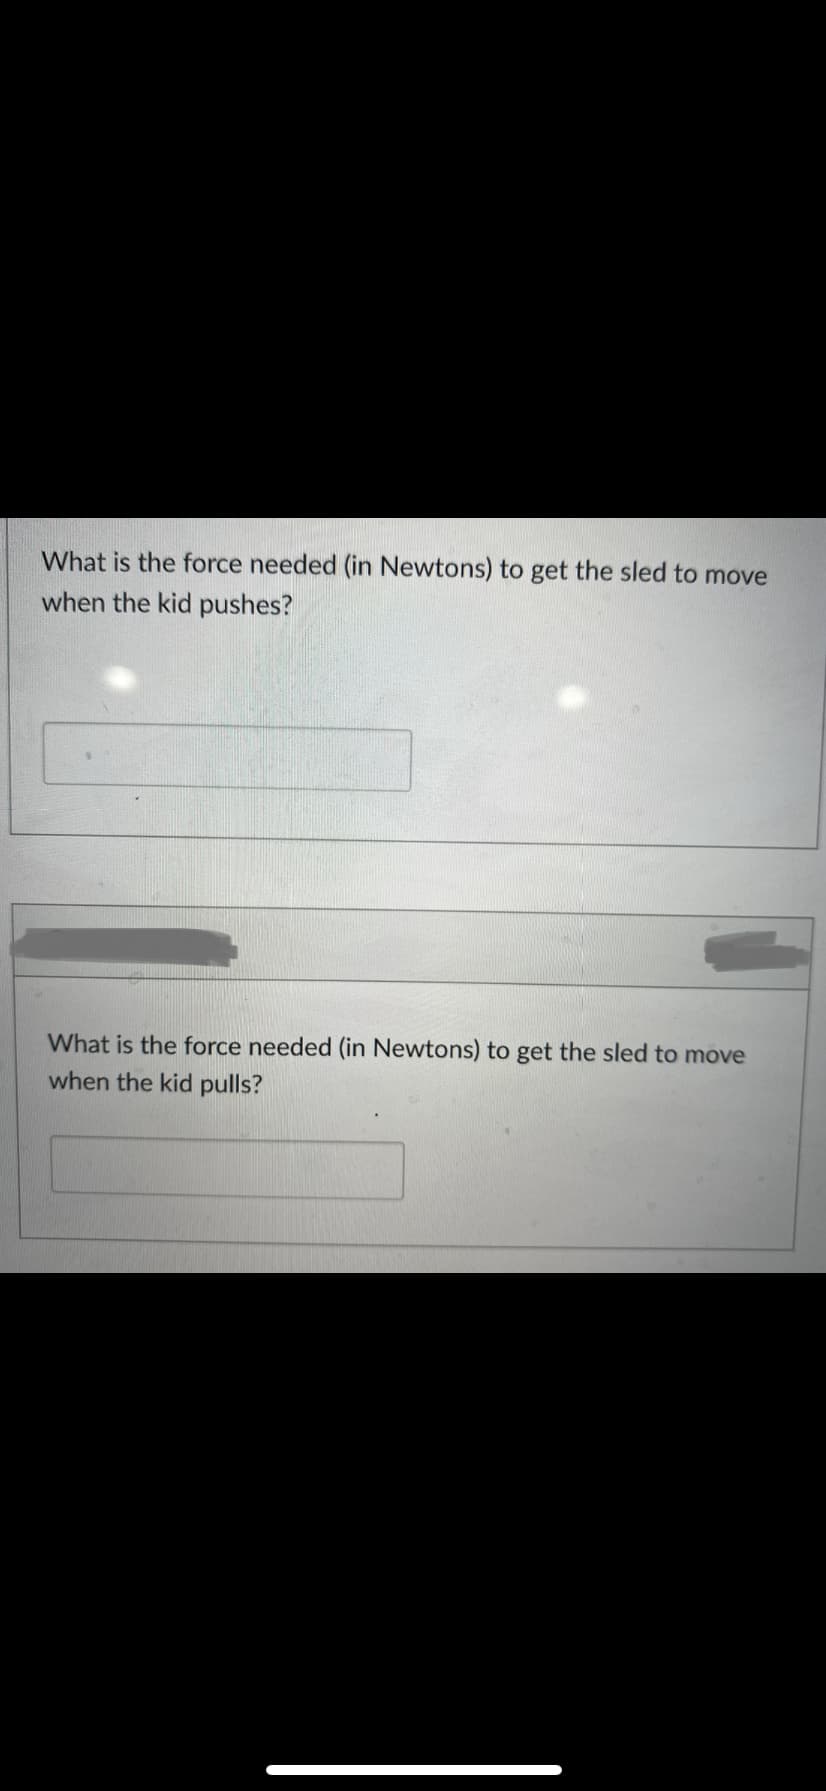 What is the force needed (in Newtons) to get the sled to move
when the kid pushes?
What is the force needed (in Newtons) to get the sled to move
when the kid pulls?
